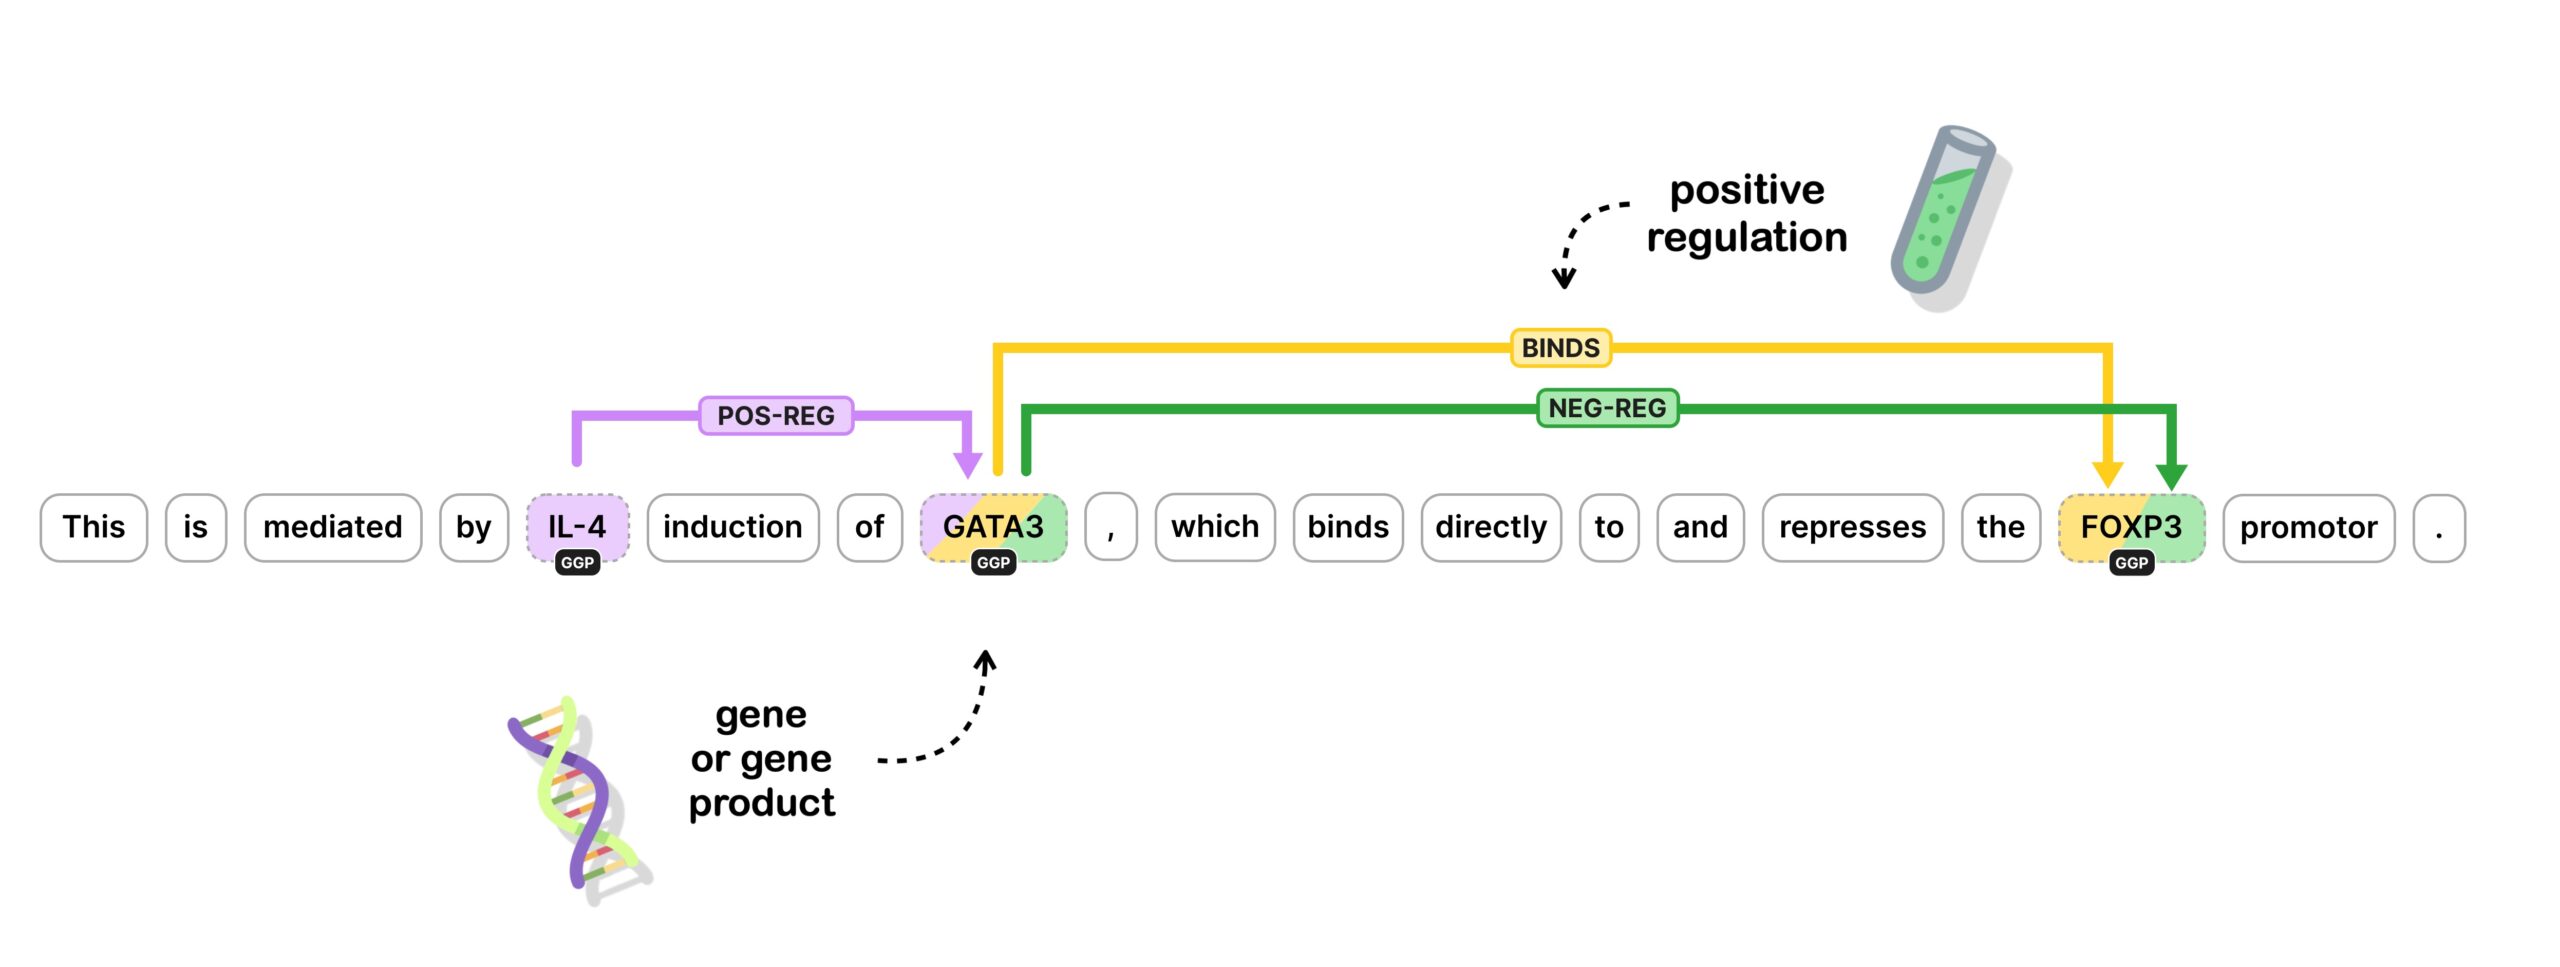 Example of a relation expressed in a sentence: "IL-4 induction of GATA3" is a "Positive regulation" with IL-4 and GATA3 both annotates as "GGP", which stands for "Gene or Gene Product"